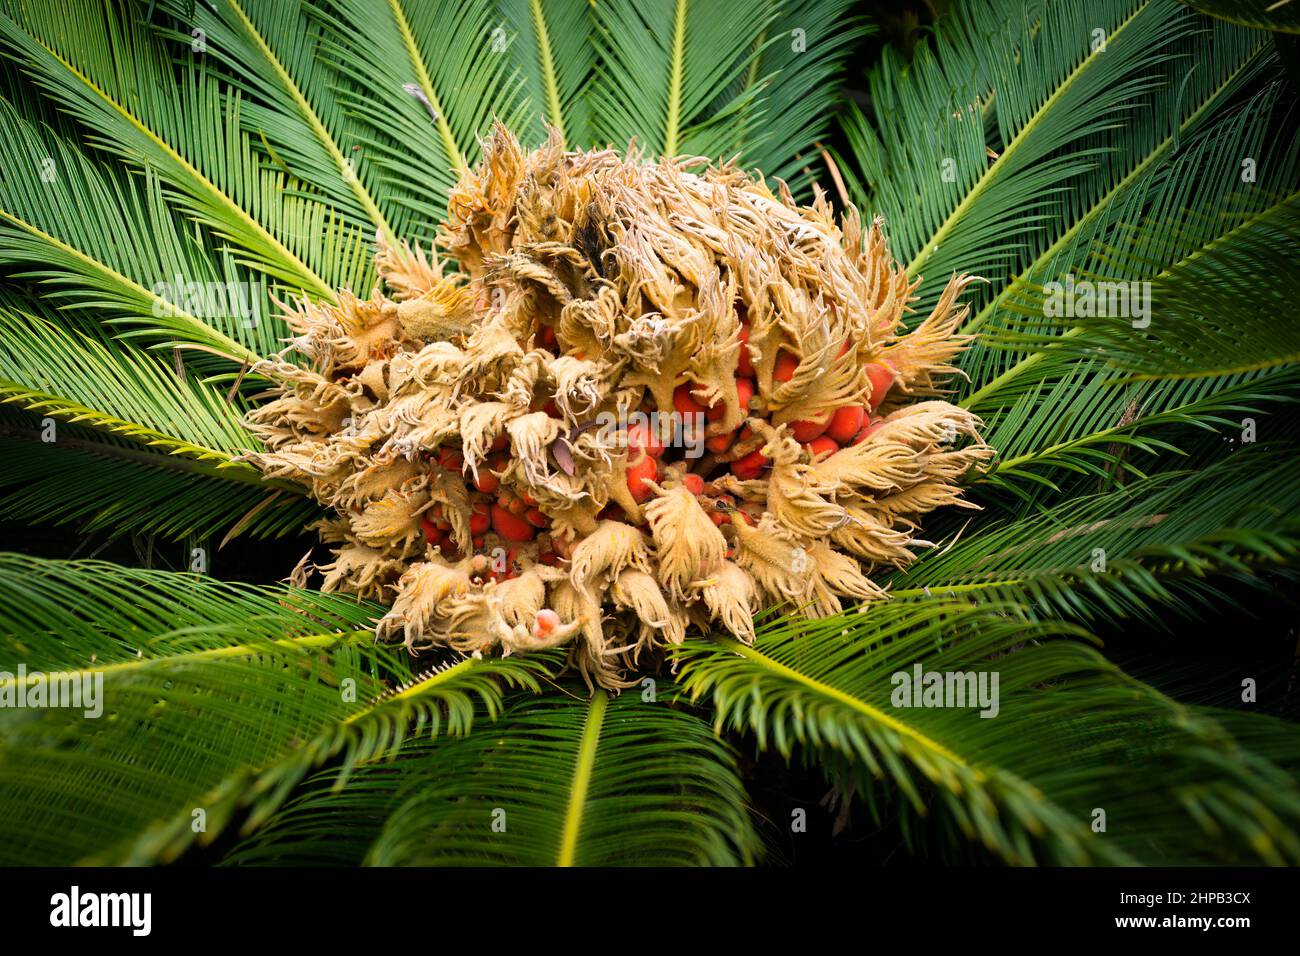 Cycad (cycas revoluta) flower and fruit Stock Photo